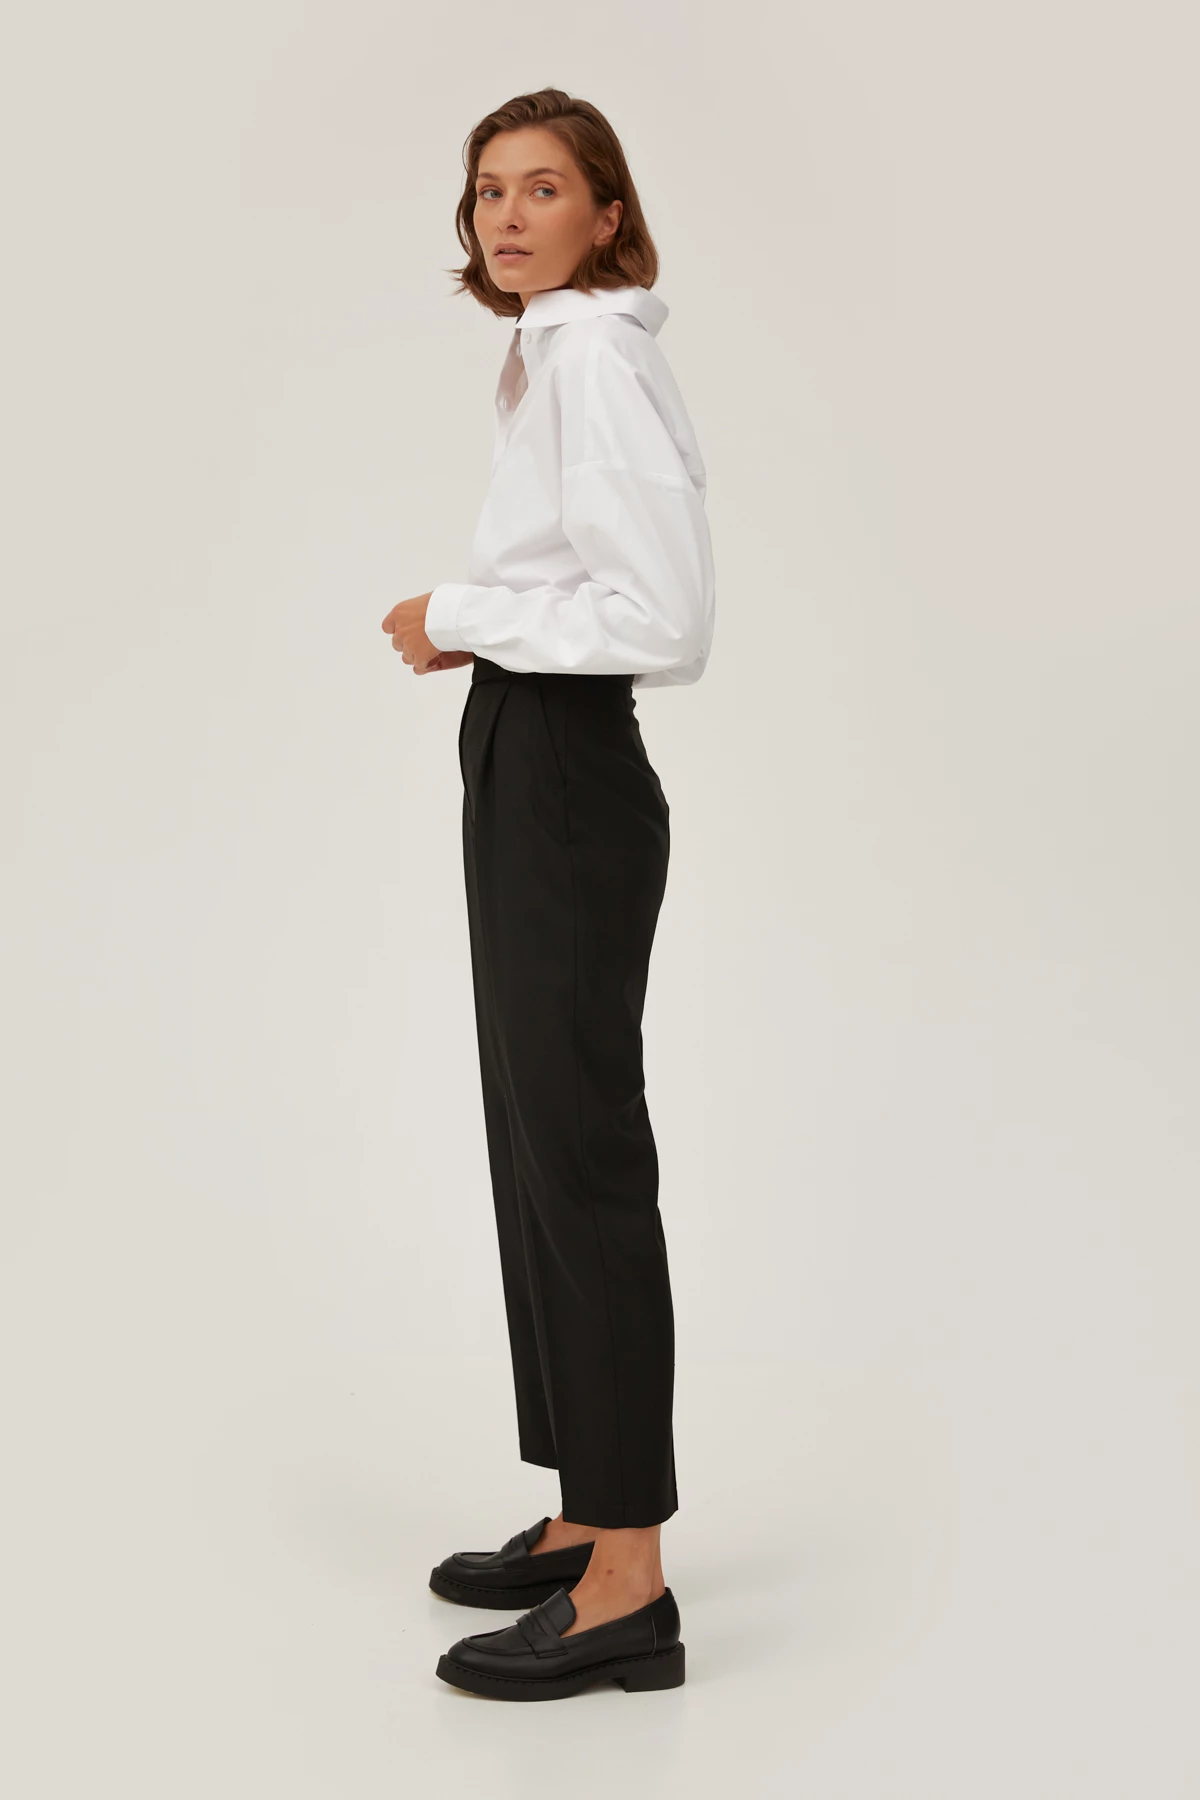 Black tapered trousers, photo 2